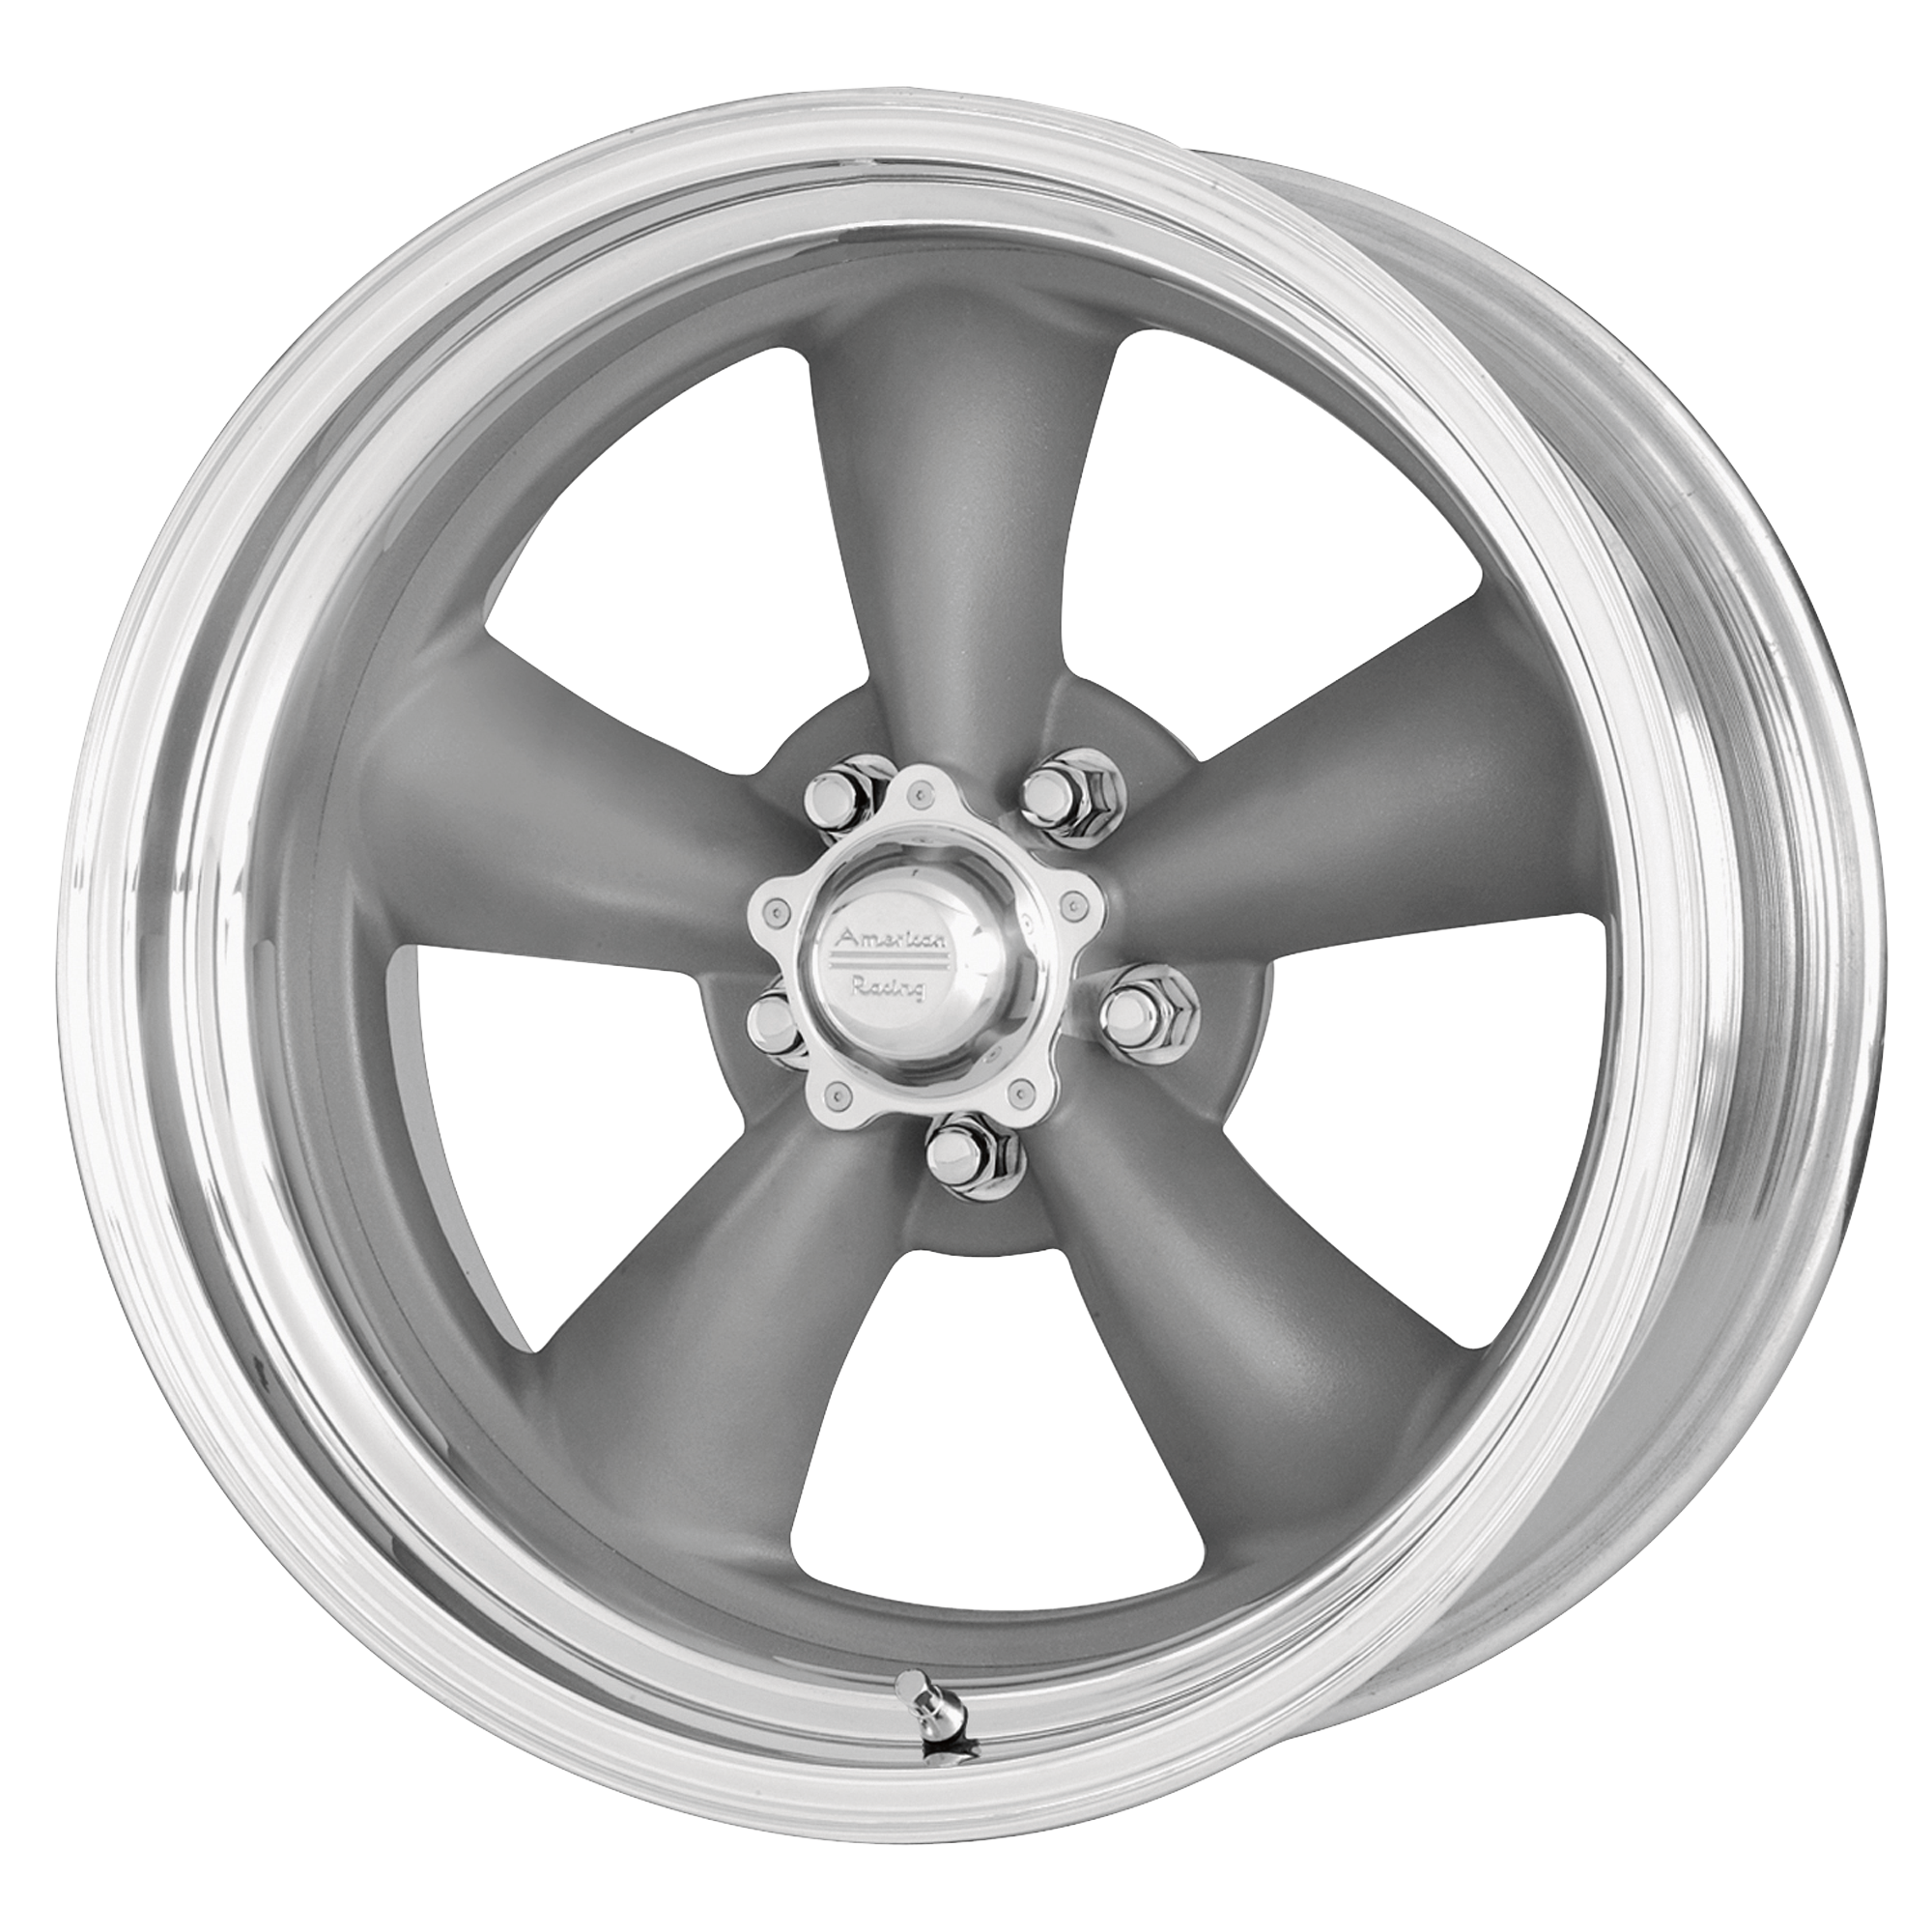 CLASSIC TORQ THRUST II ONE PIECE 18x7 5x114.30 MAG GRAY W/ MACHINED LIP (6 mm) - Tires and Engine Performance